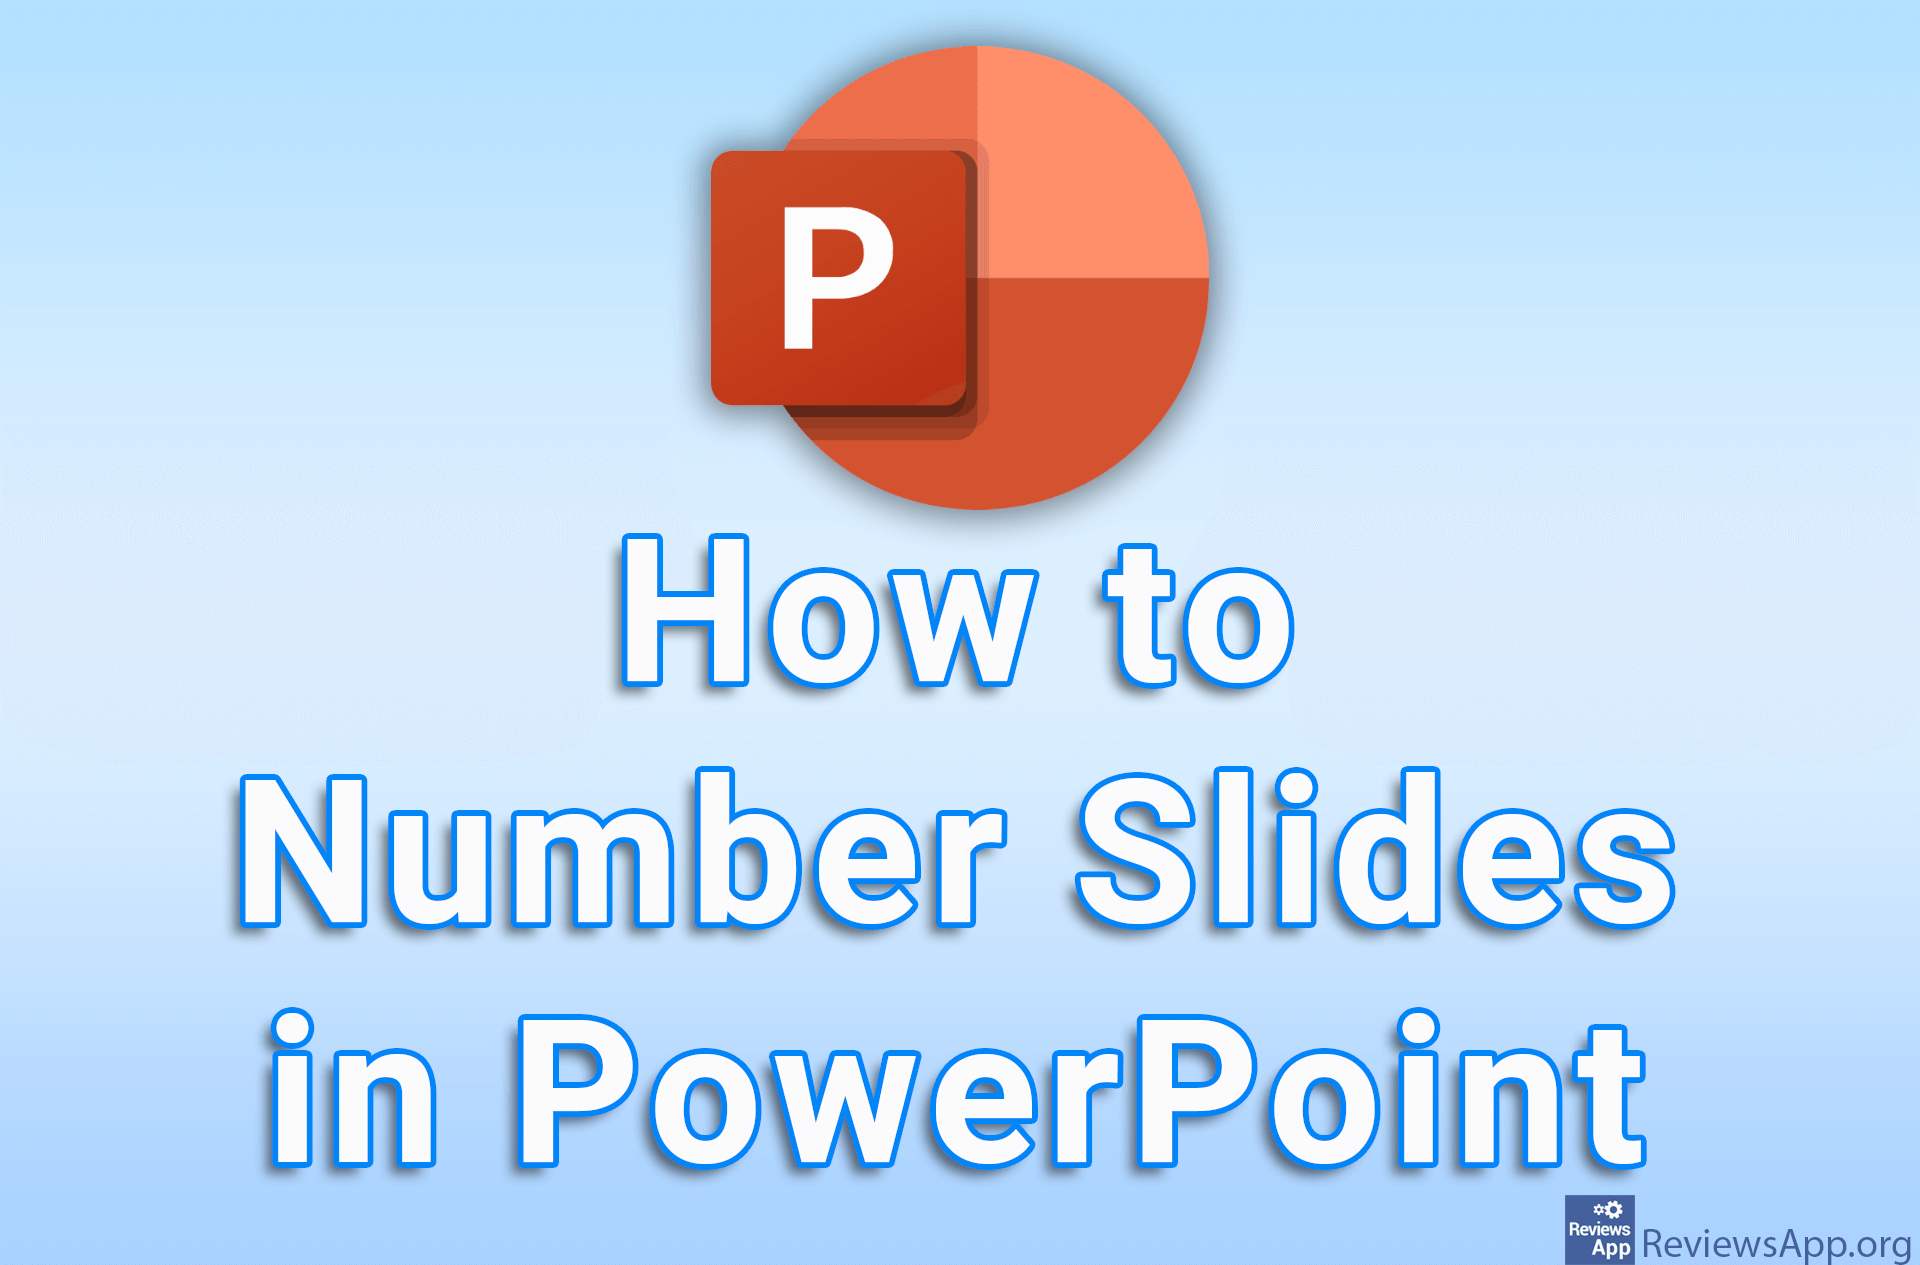 How to Number Slides in PowerPoint